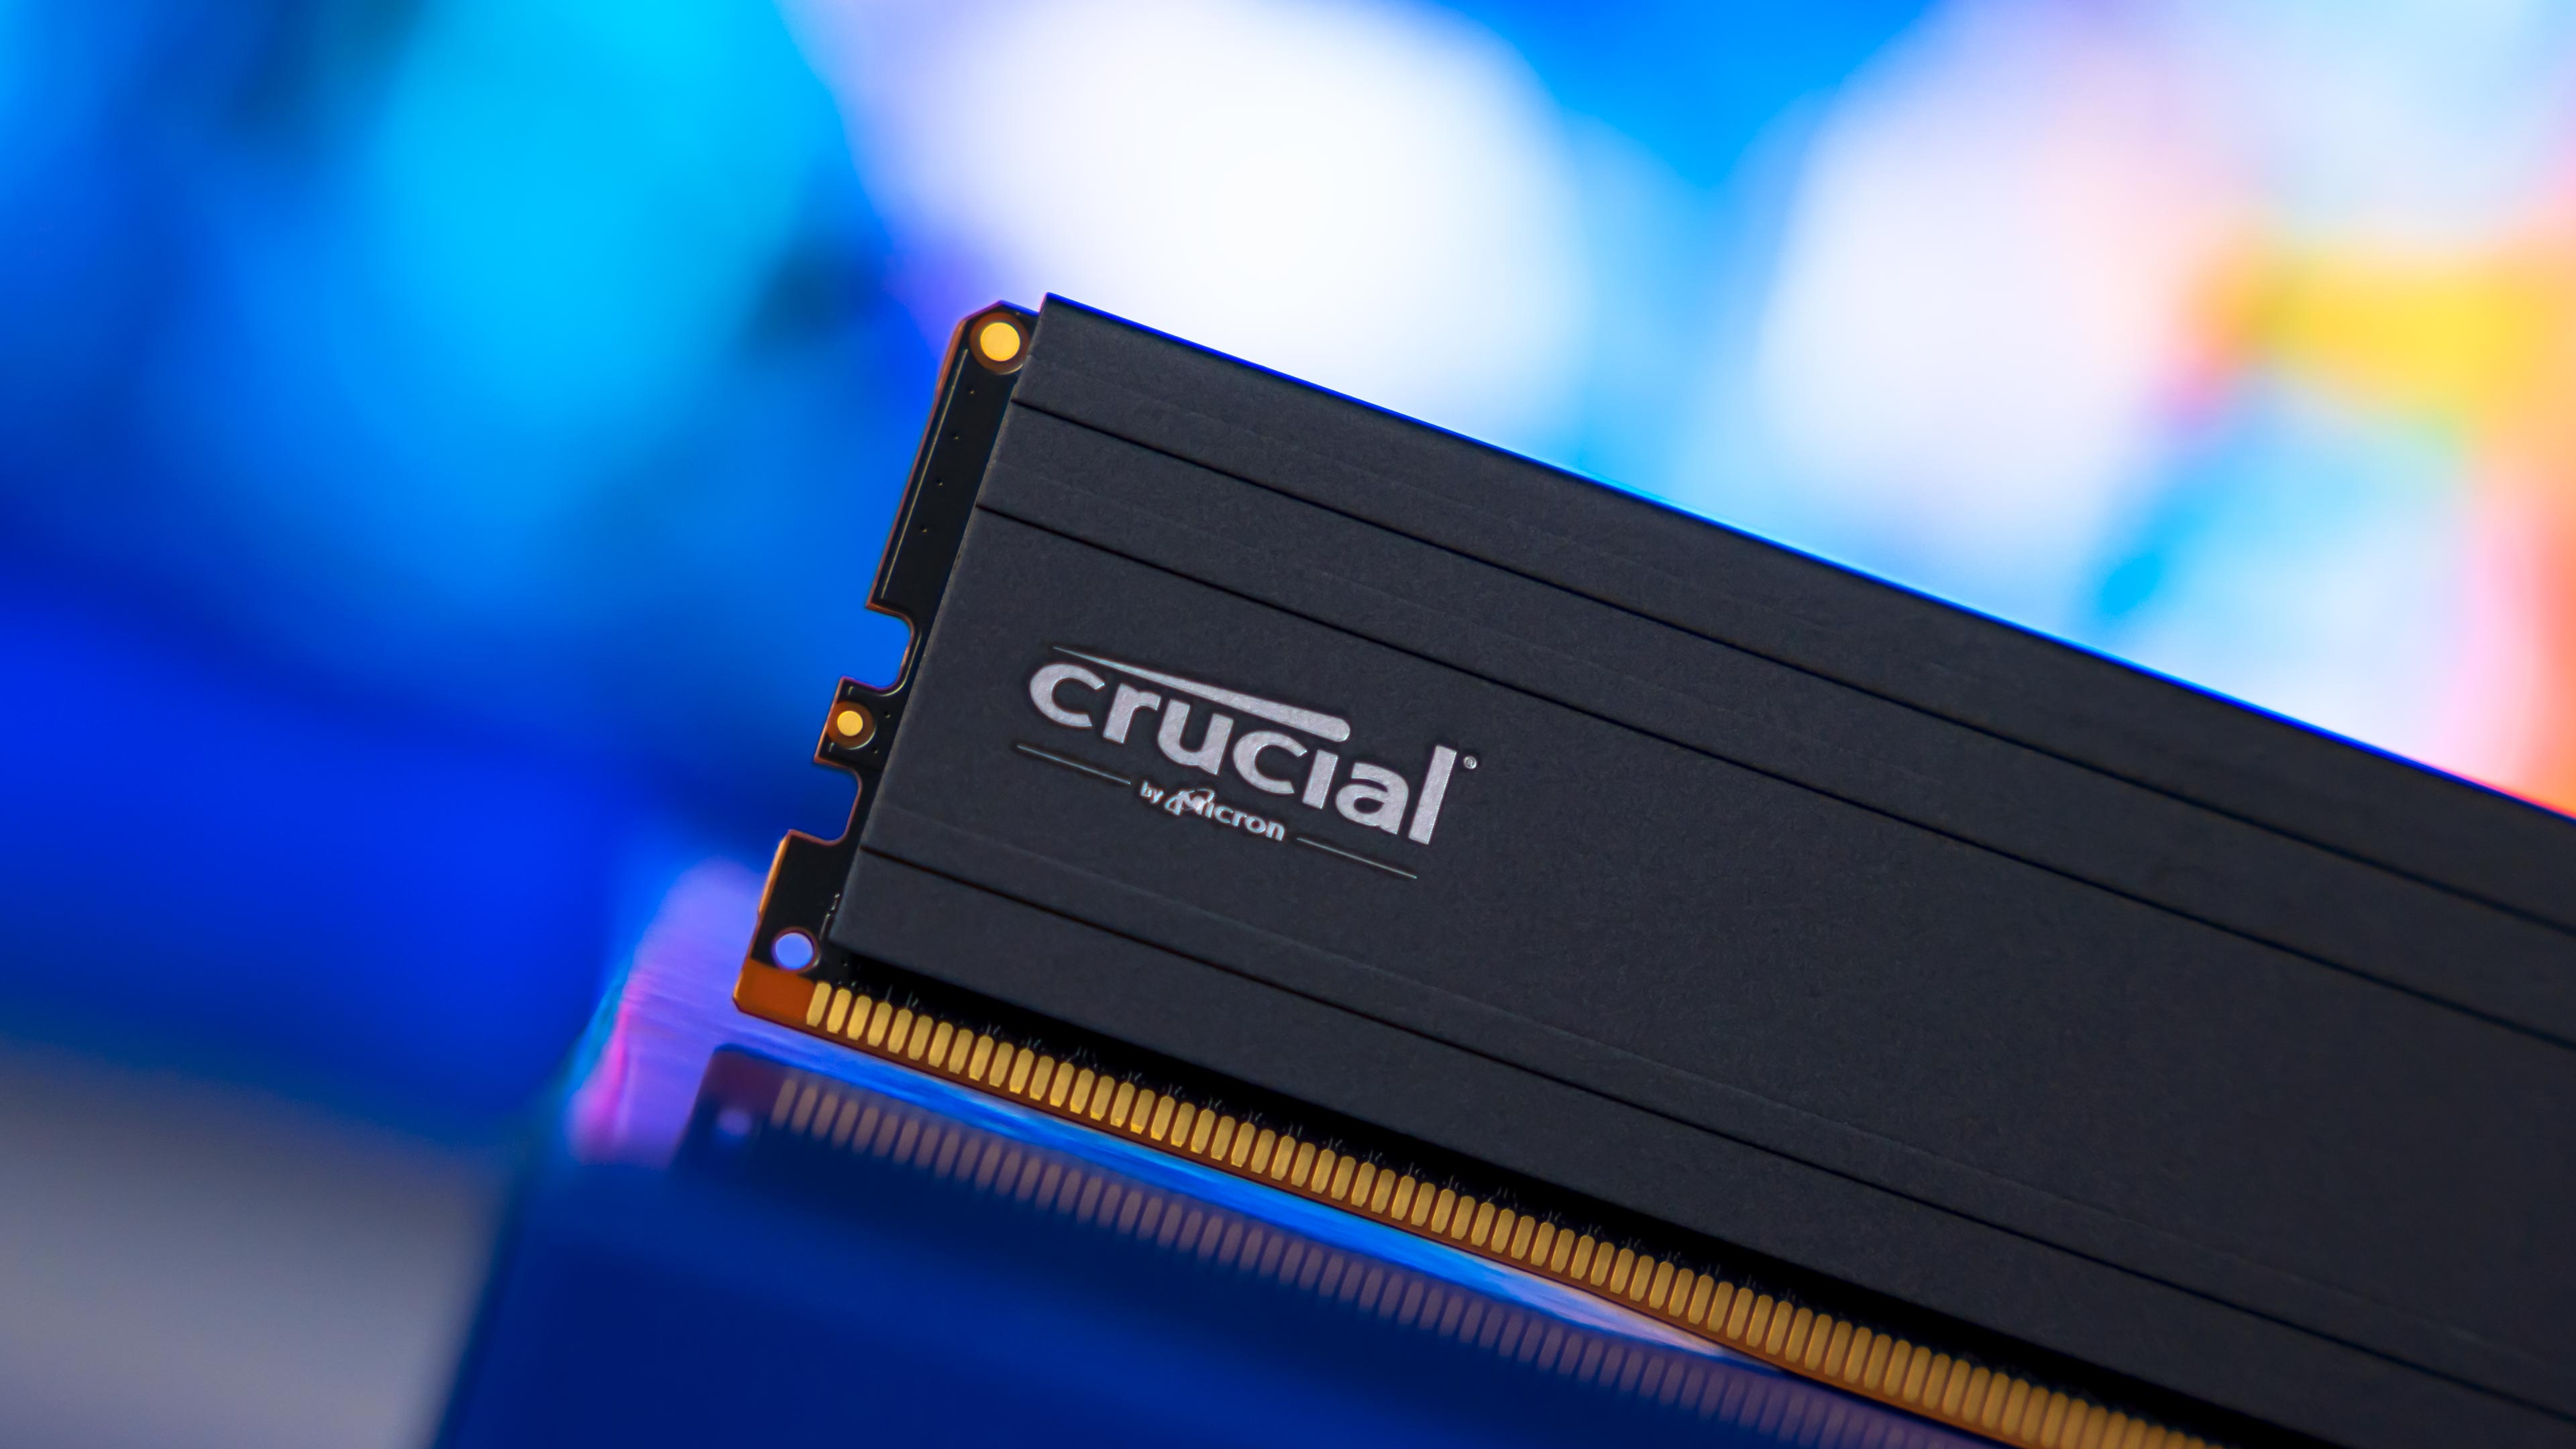 Crucial Pro DDR5 5600Mhz Memory (4)